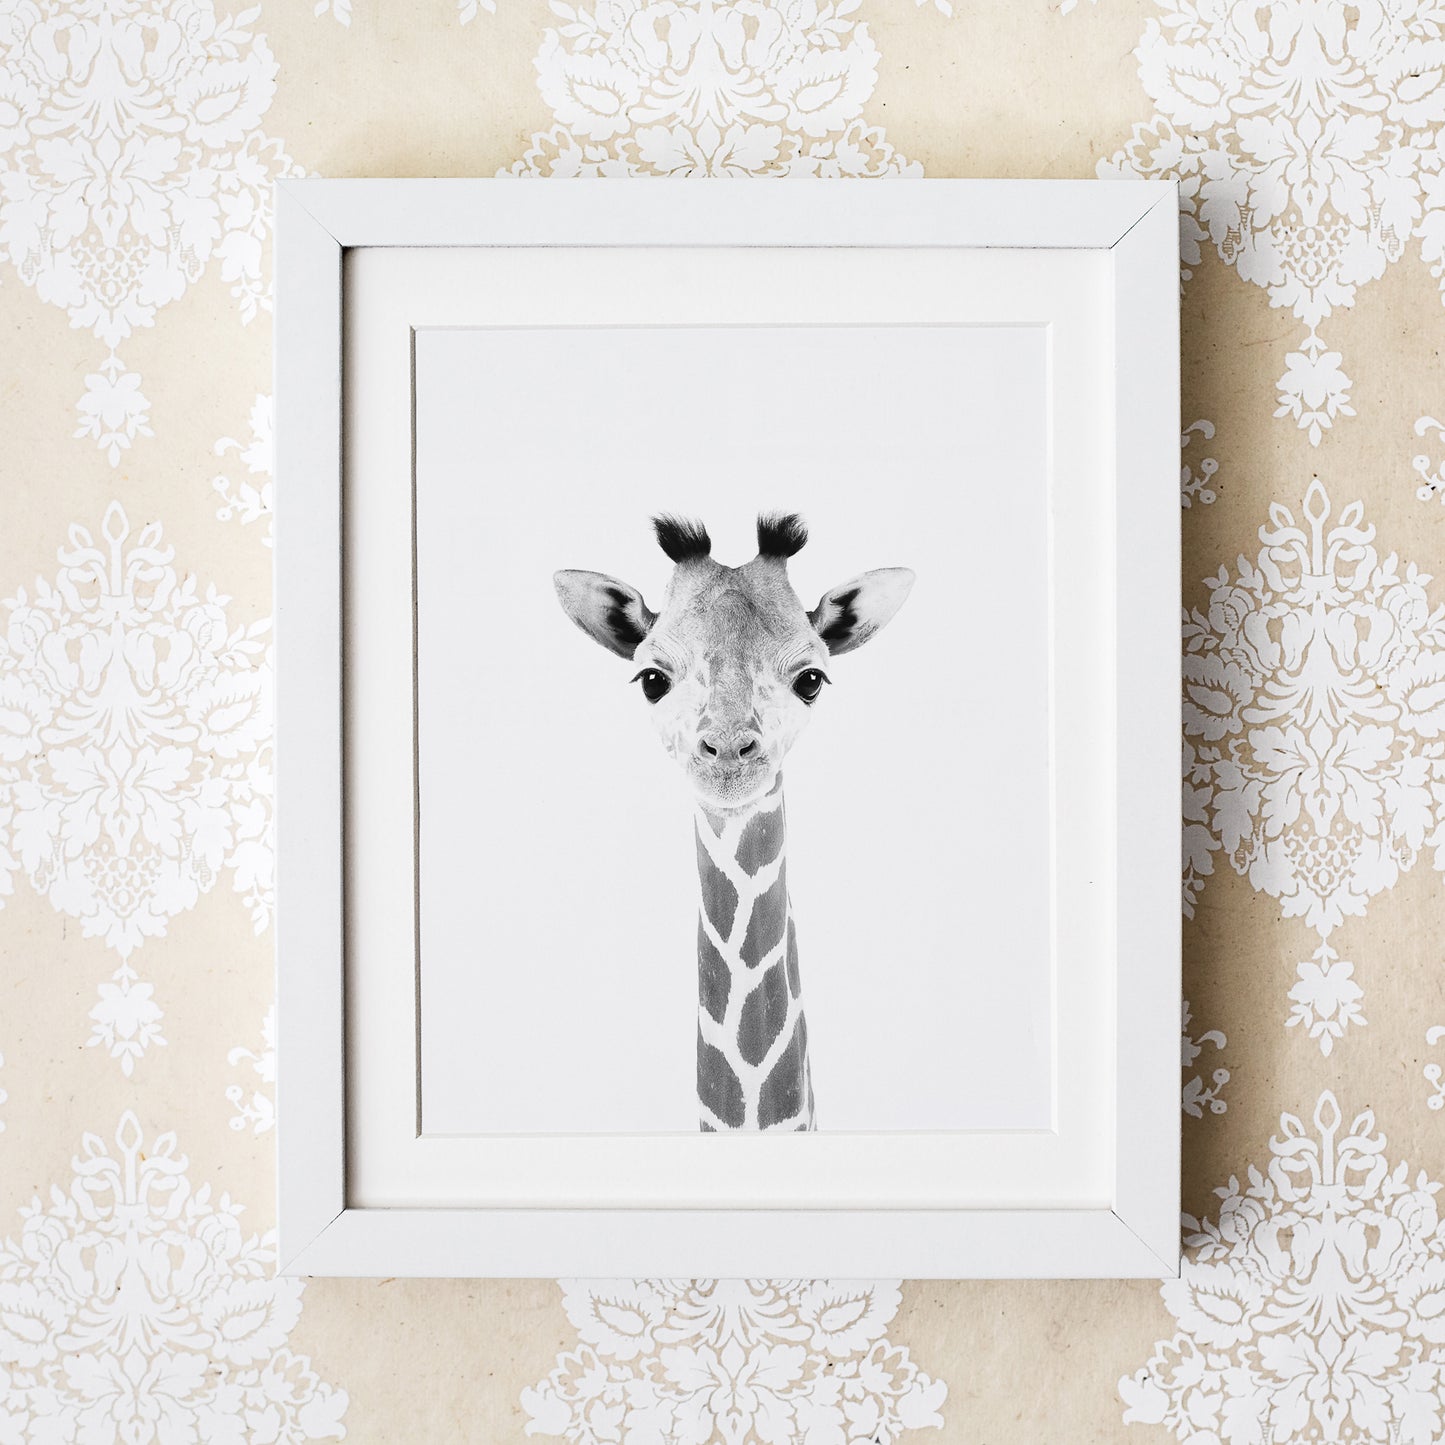 black and white baby giraffe in white frame on a yellow wallpaper